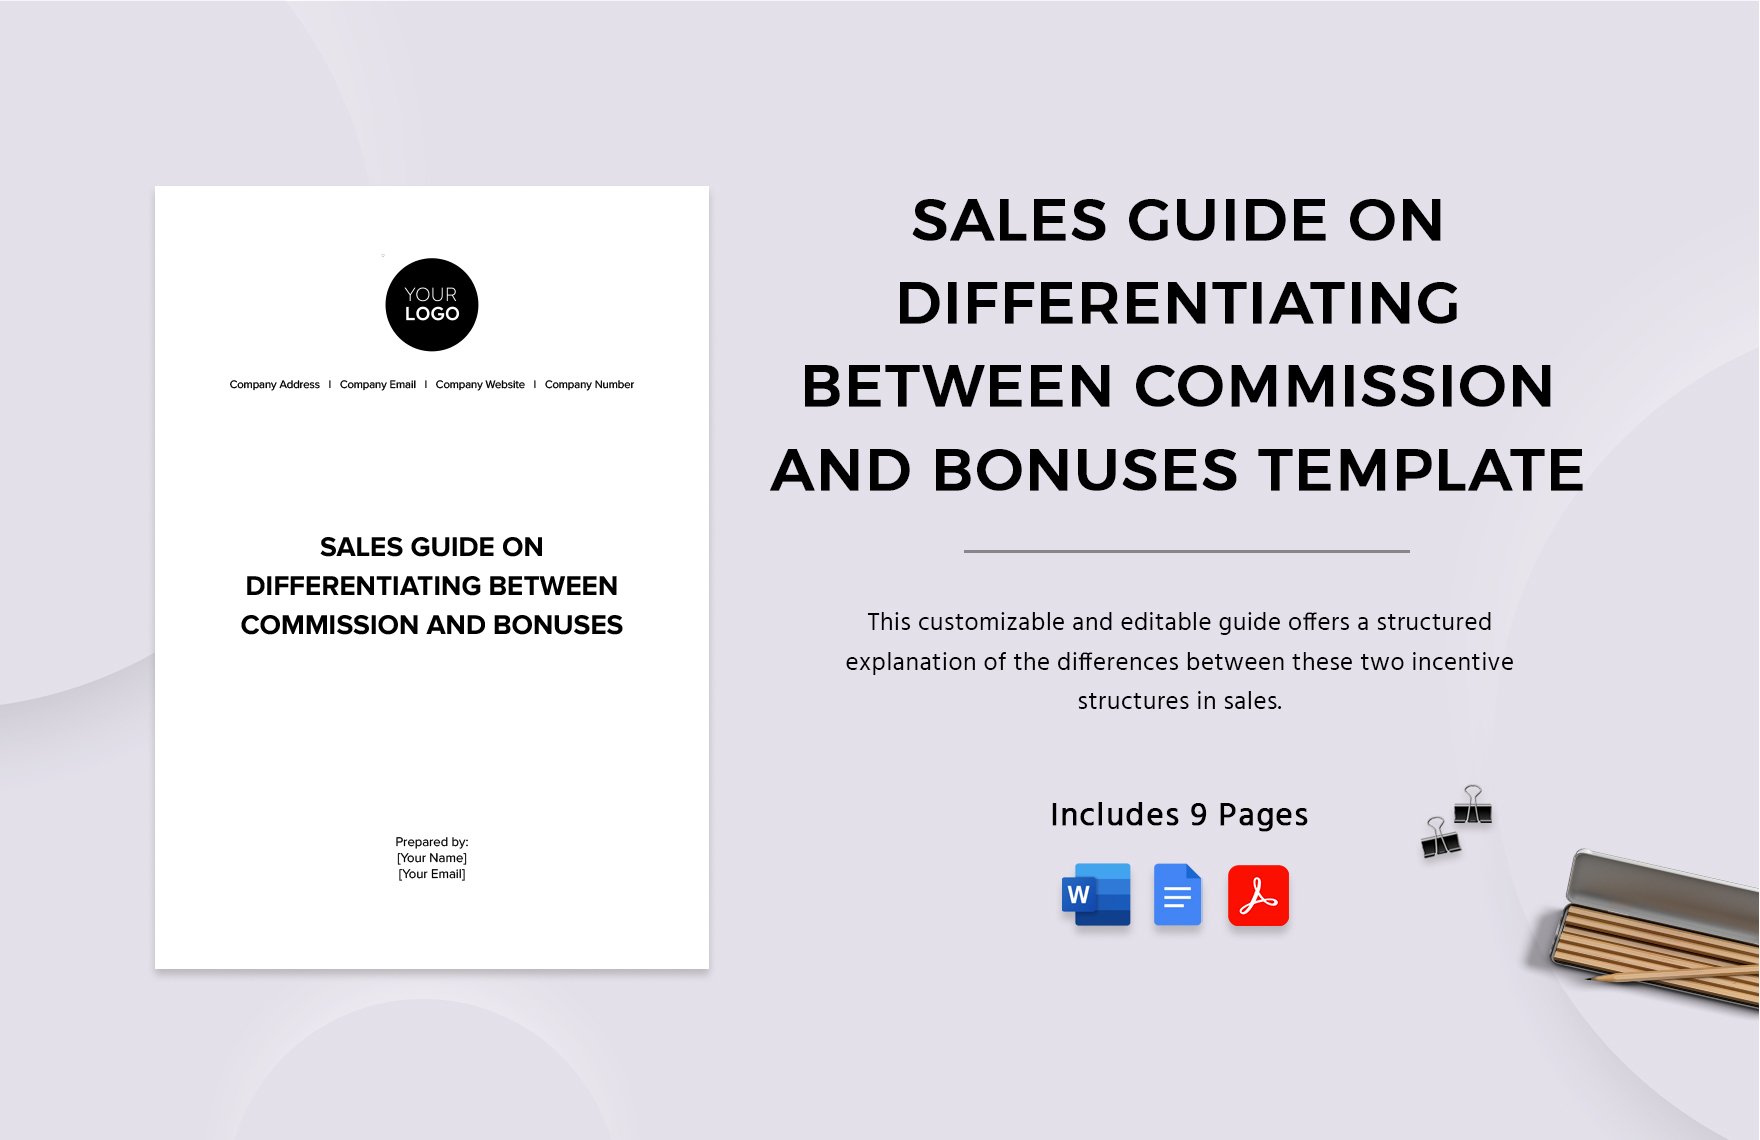 Sales Guide on Differentiating Between Commission and Bonuses Template